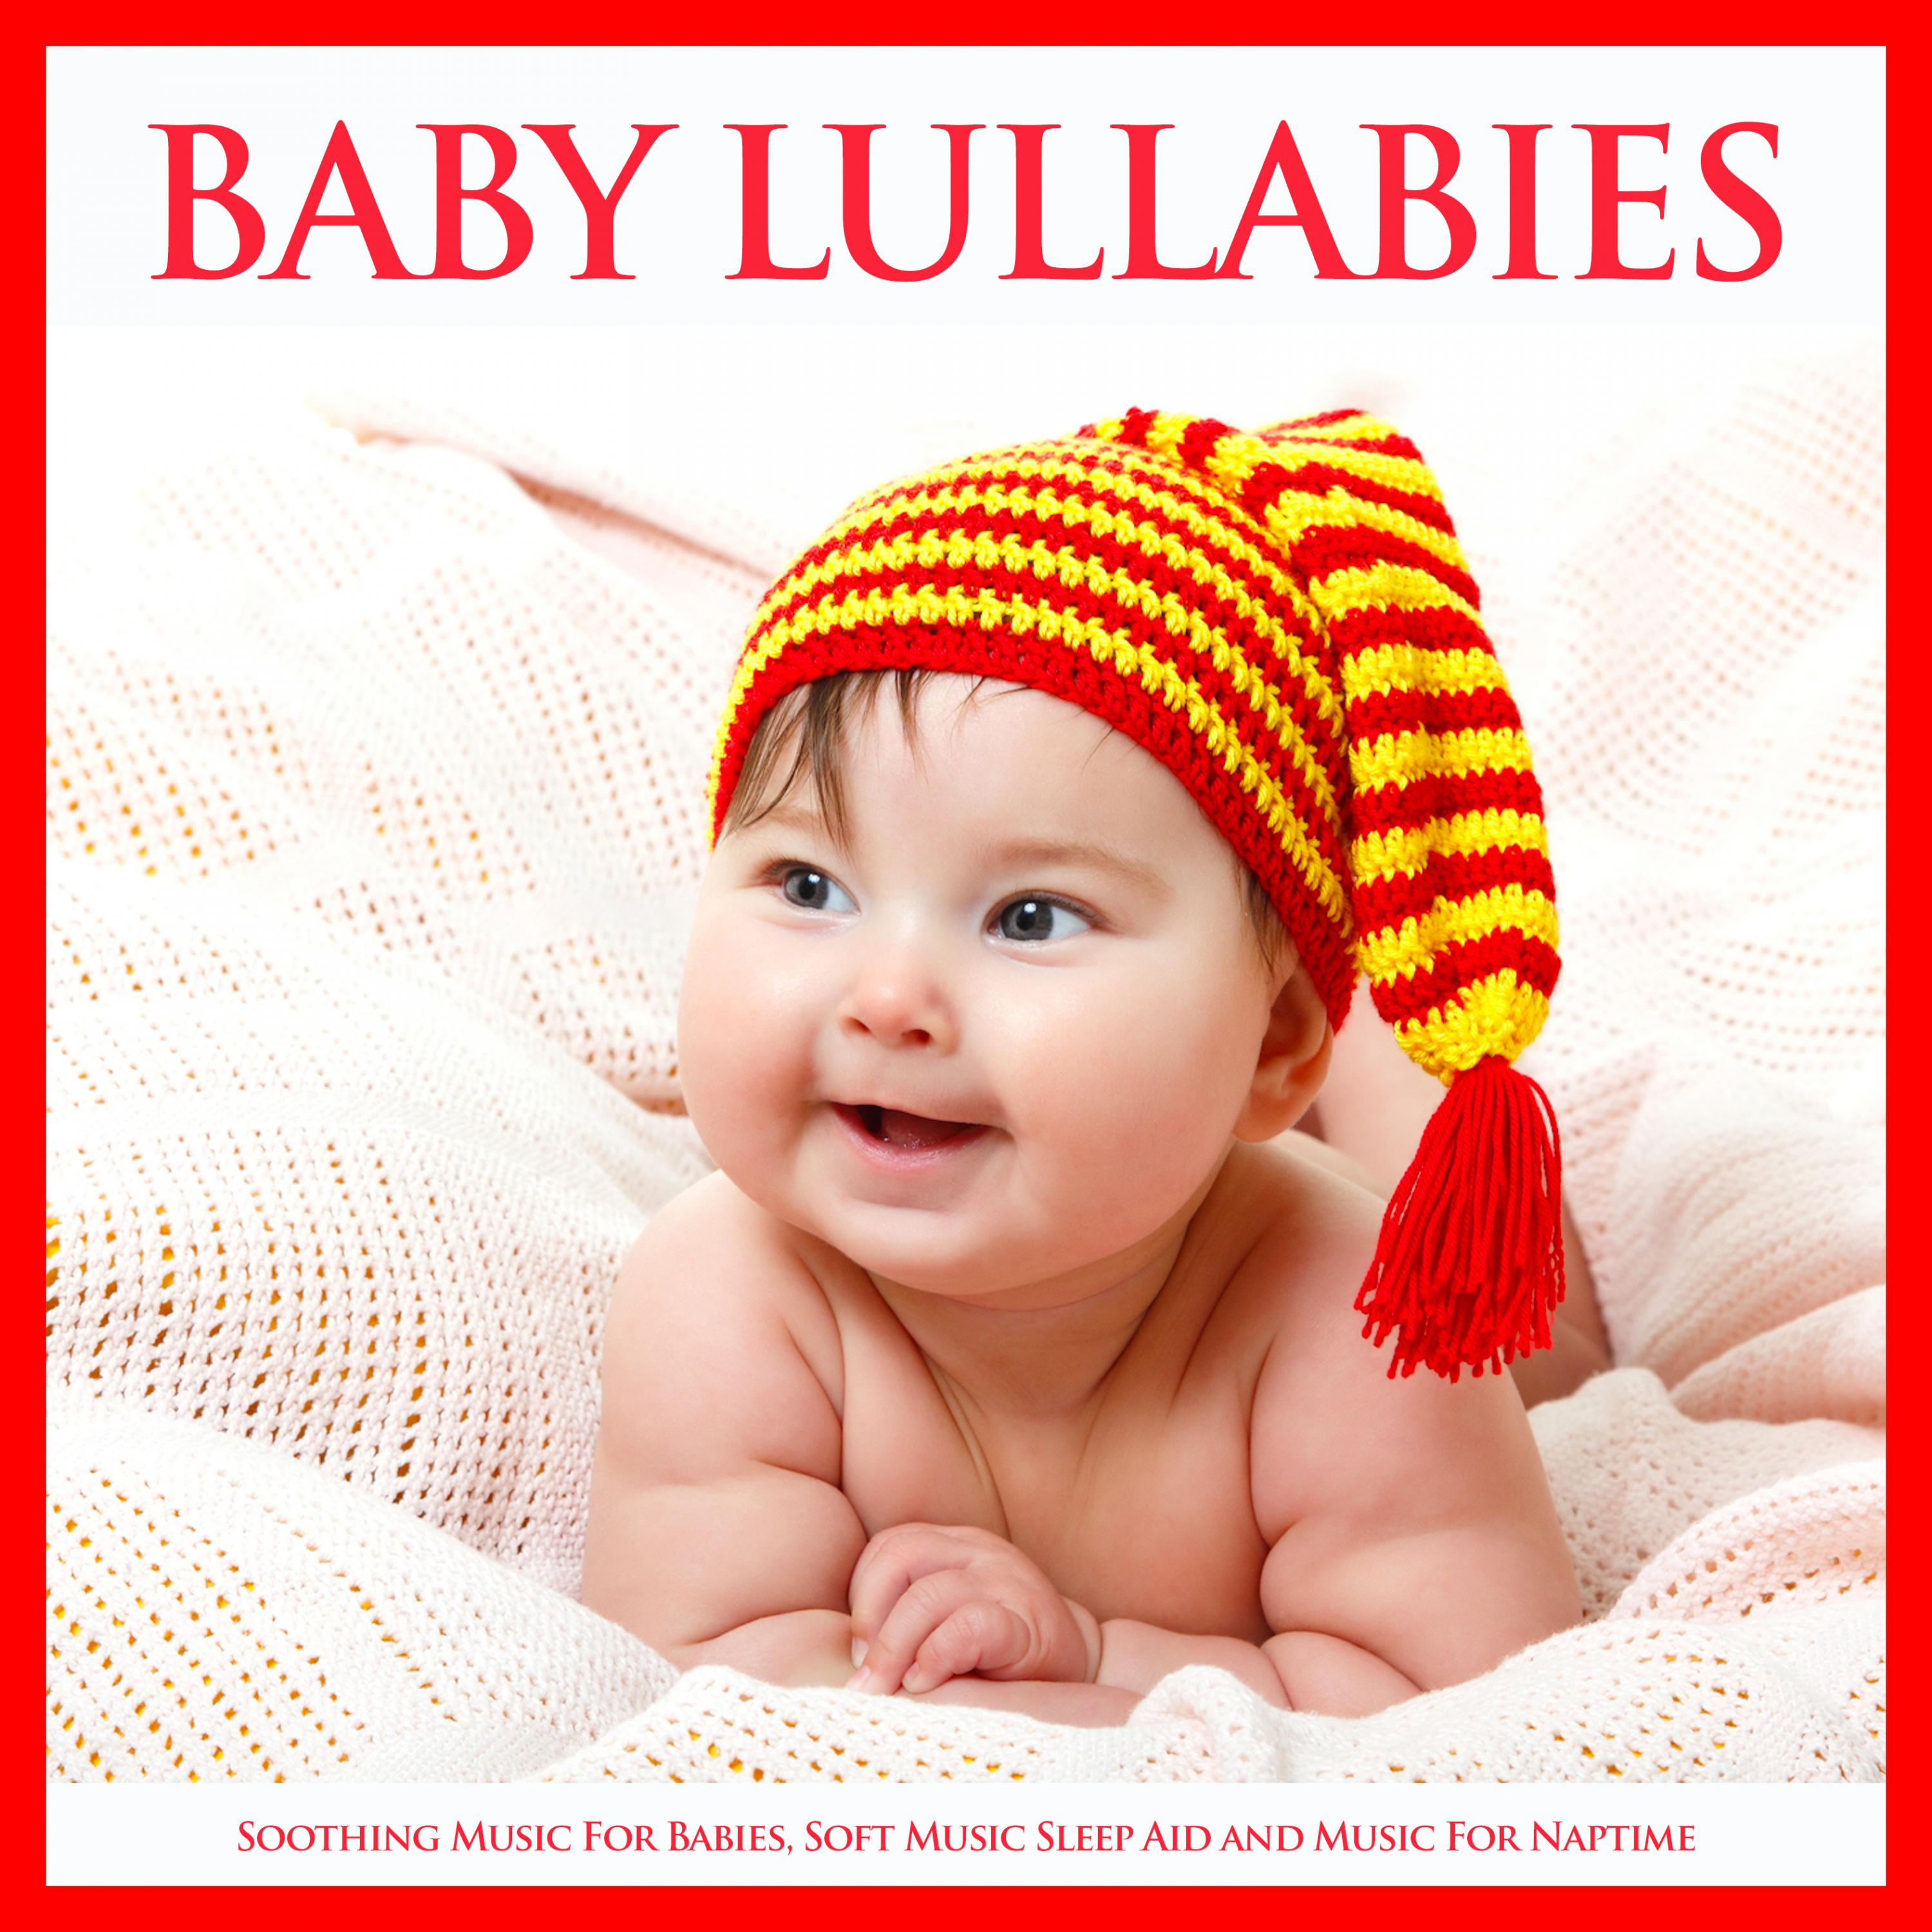 Baby Lullabies: Soothing Music For Babies, Soft Music Sleep Aid and Music For Naptime